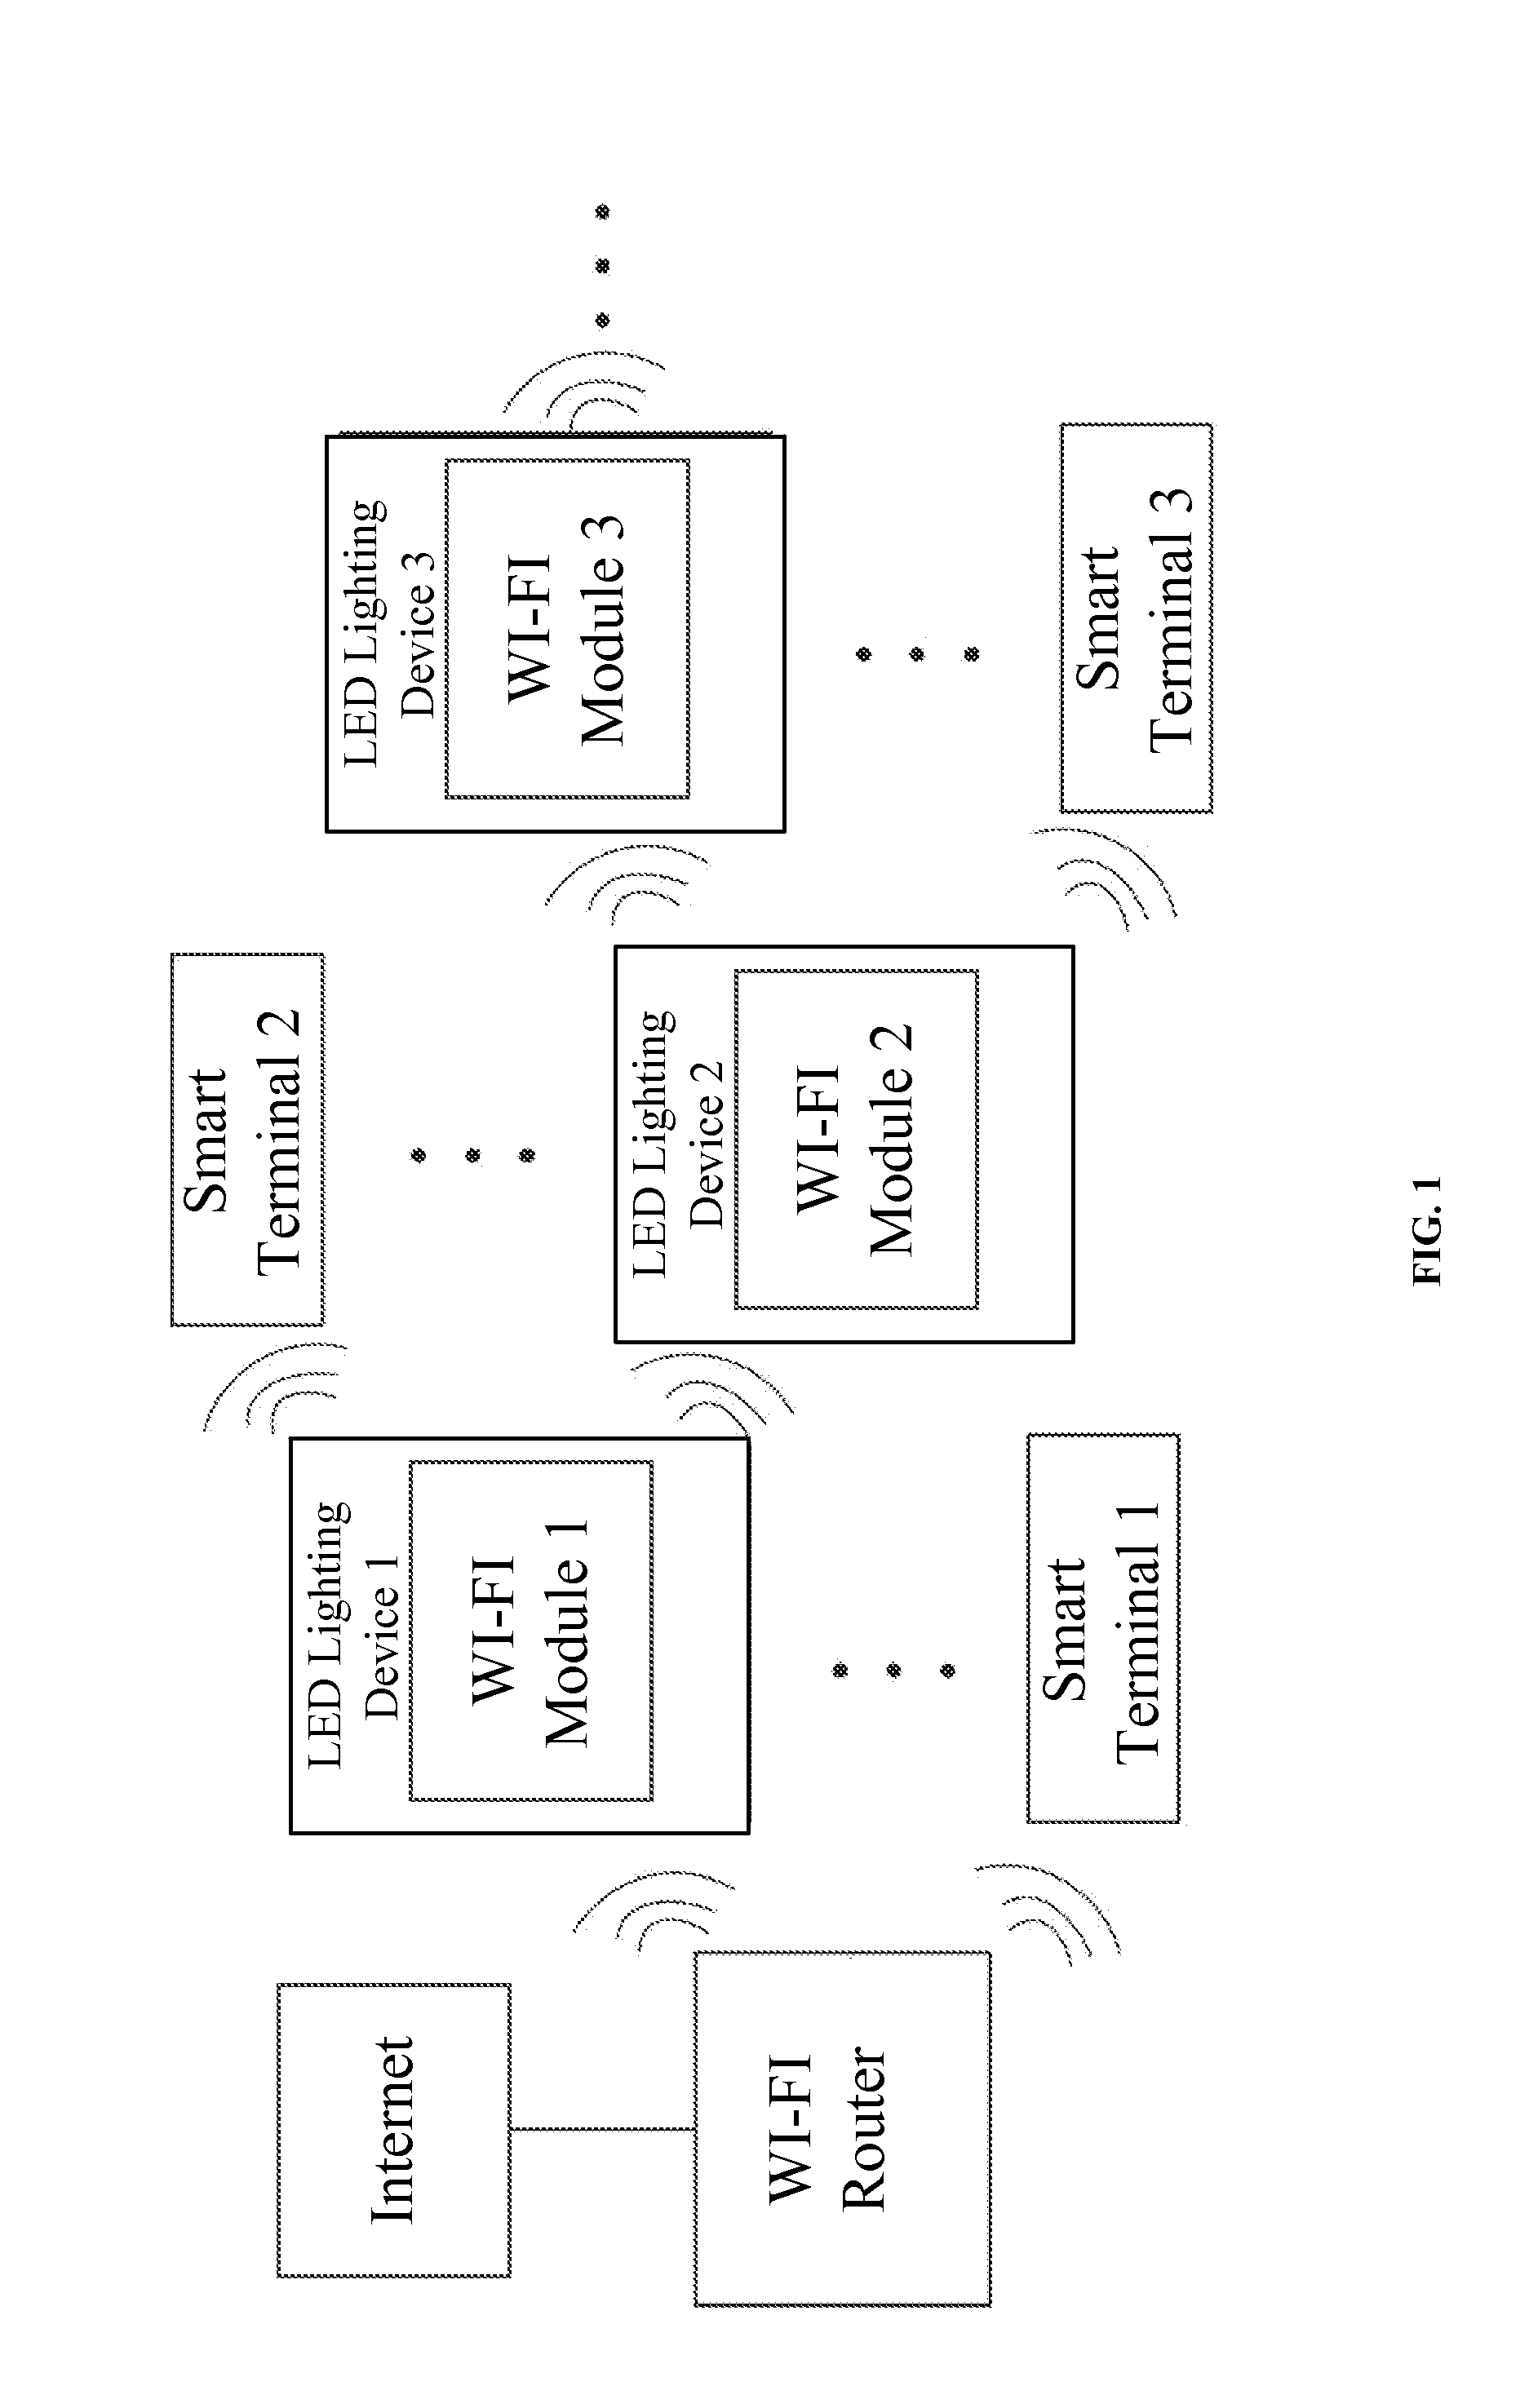 Wireless network system and smart device management method using LED lighting devices